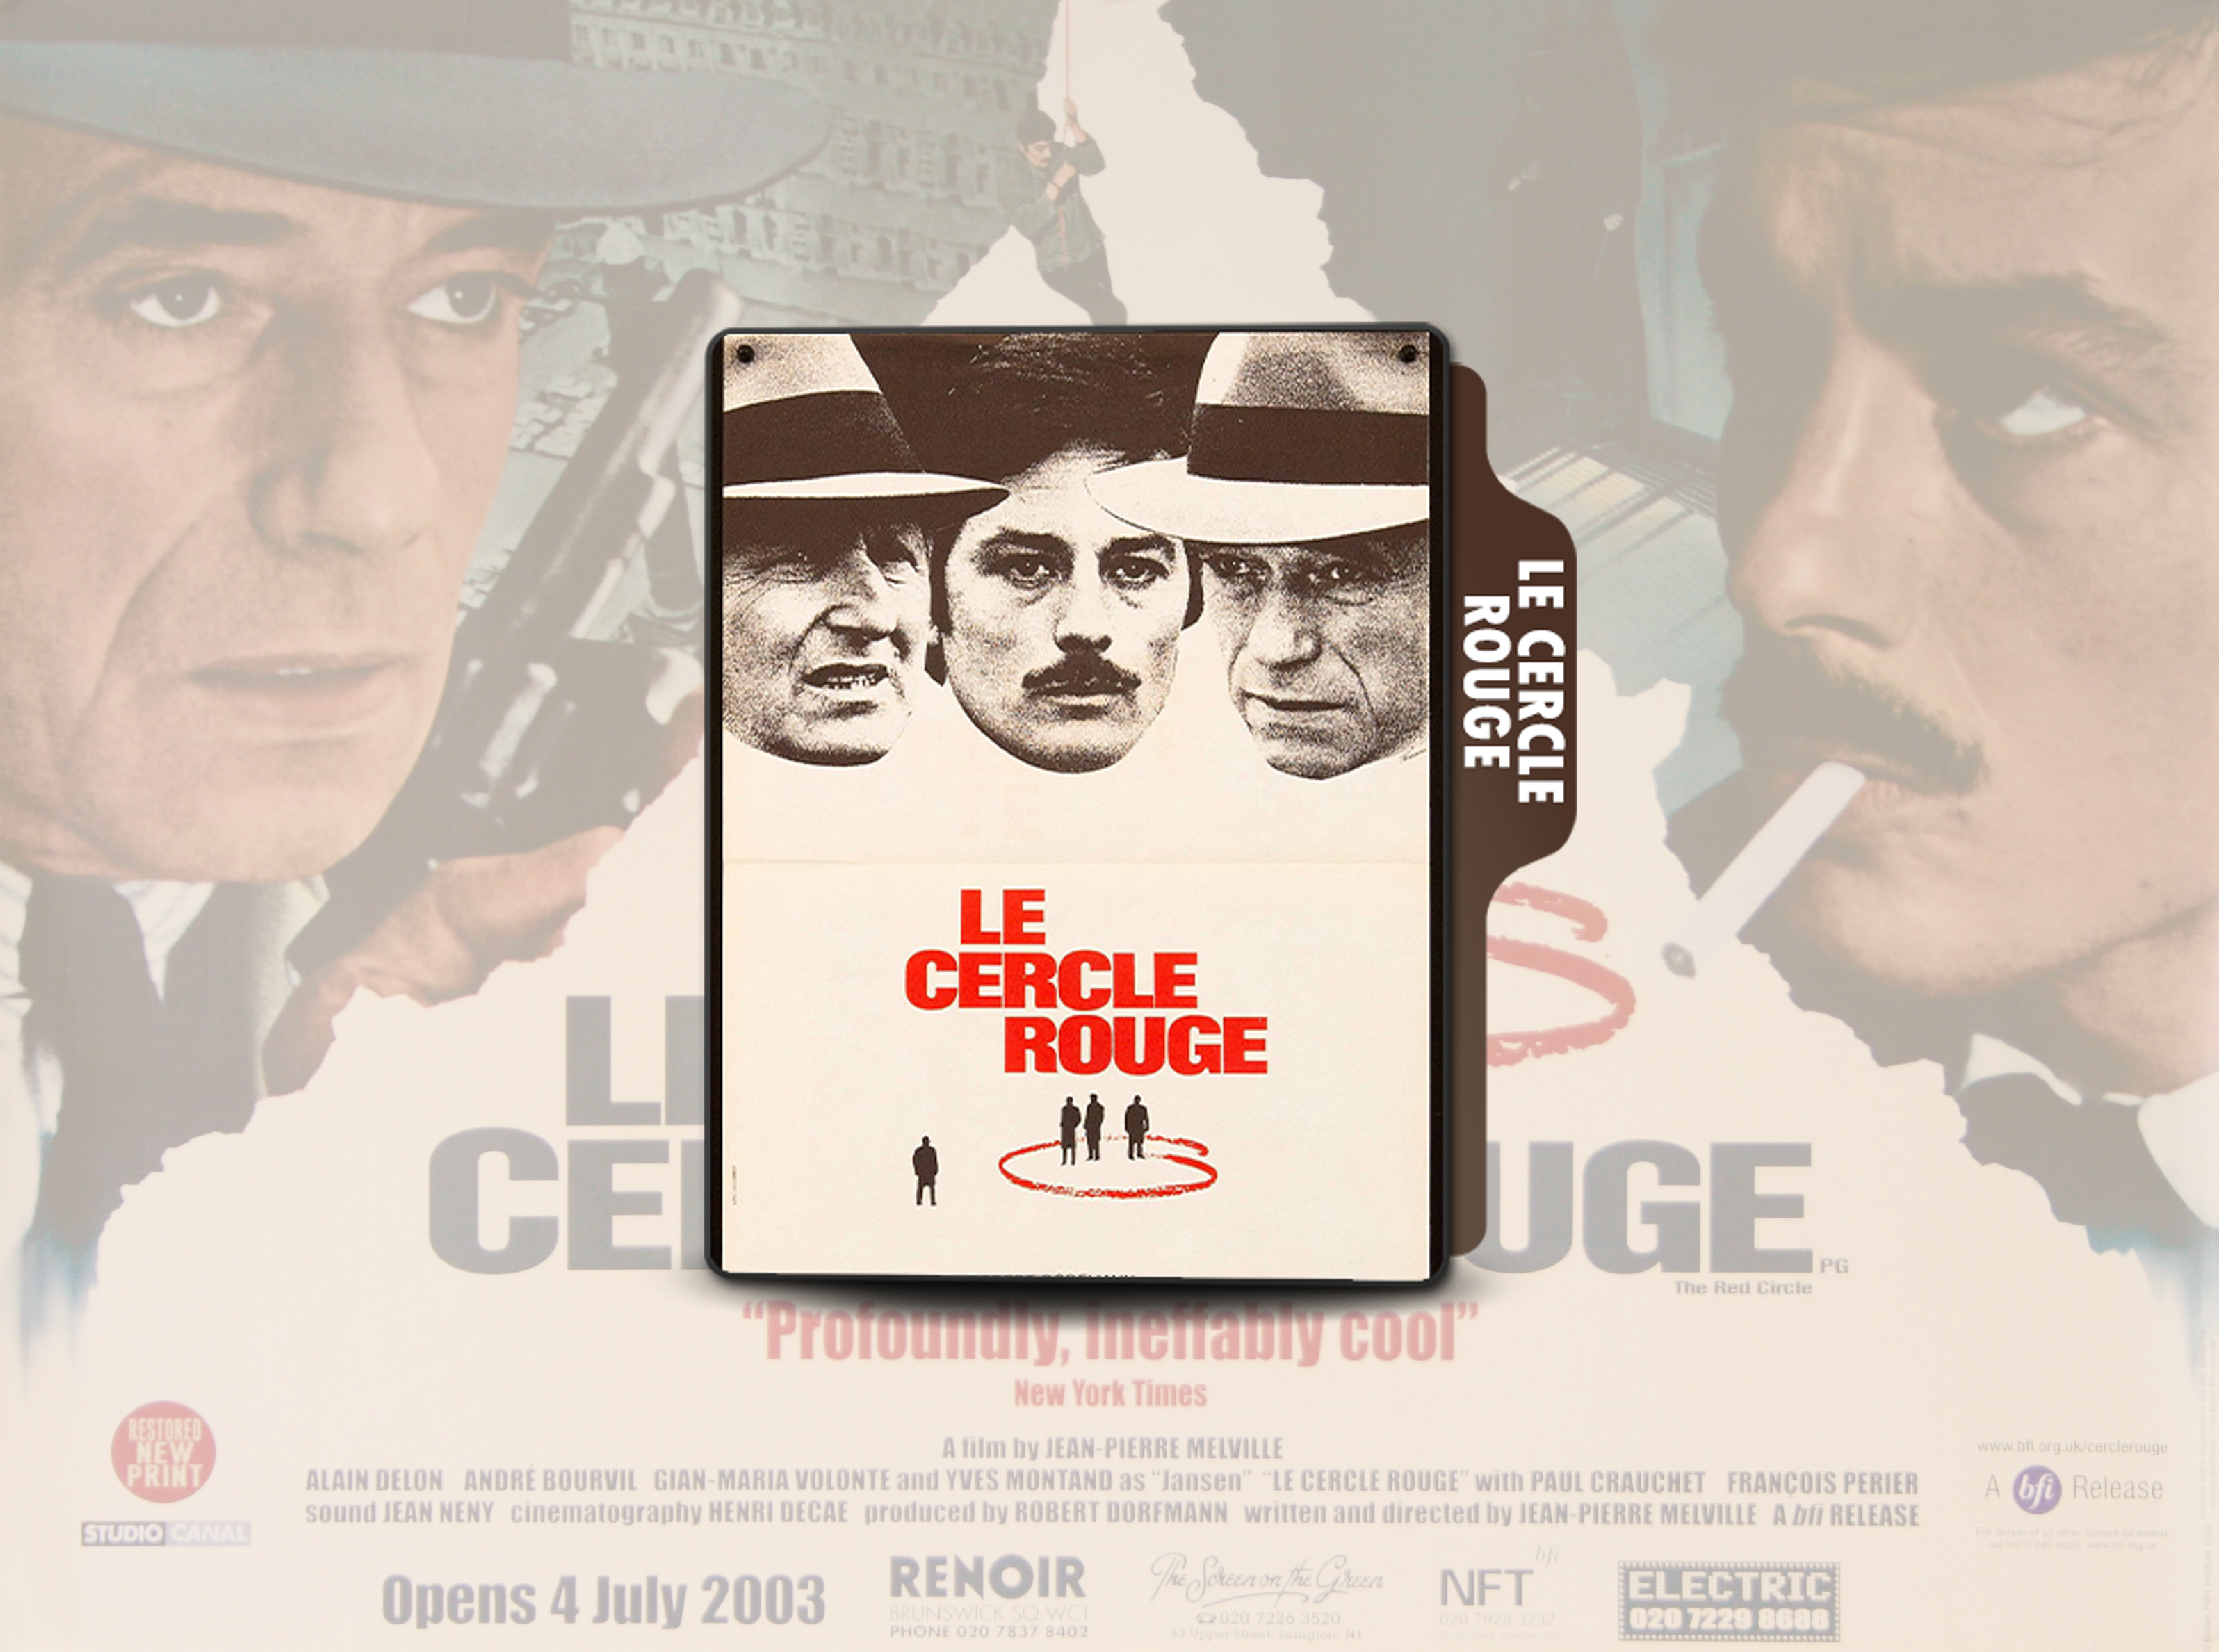 Le cercle rouge: What Is the Red Circle?, Current